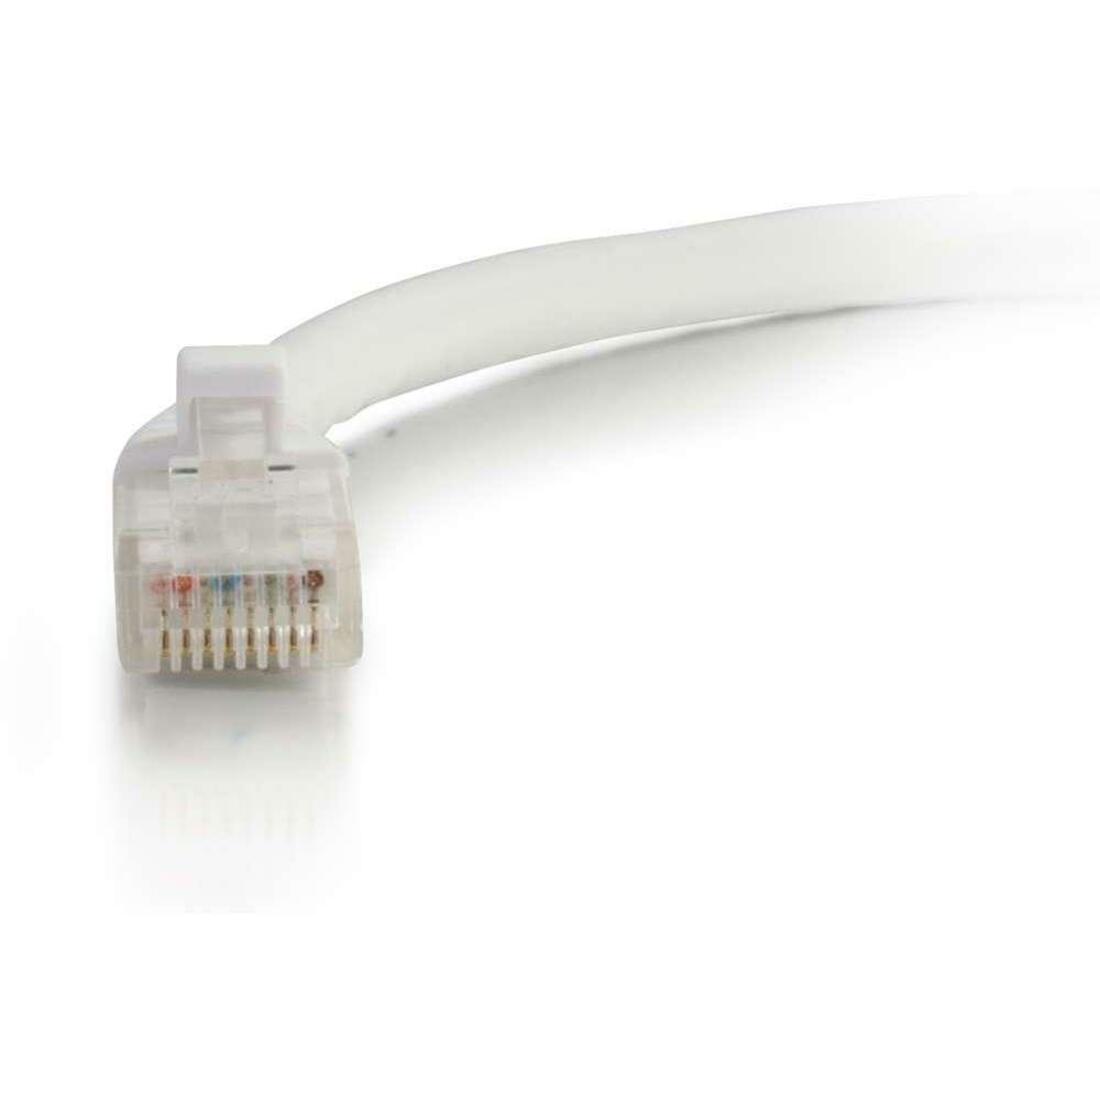 C2G 27165 25ft Cat6 Unshielded Ethernet Cable White C2G = C2G 27165 = 27165 25ft = 25フィート Cat6 = Cat6 Unshielded = 非シールド Ethernet Cable = イーサネットケーブル White = ホワイト